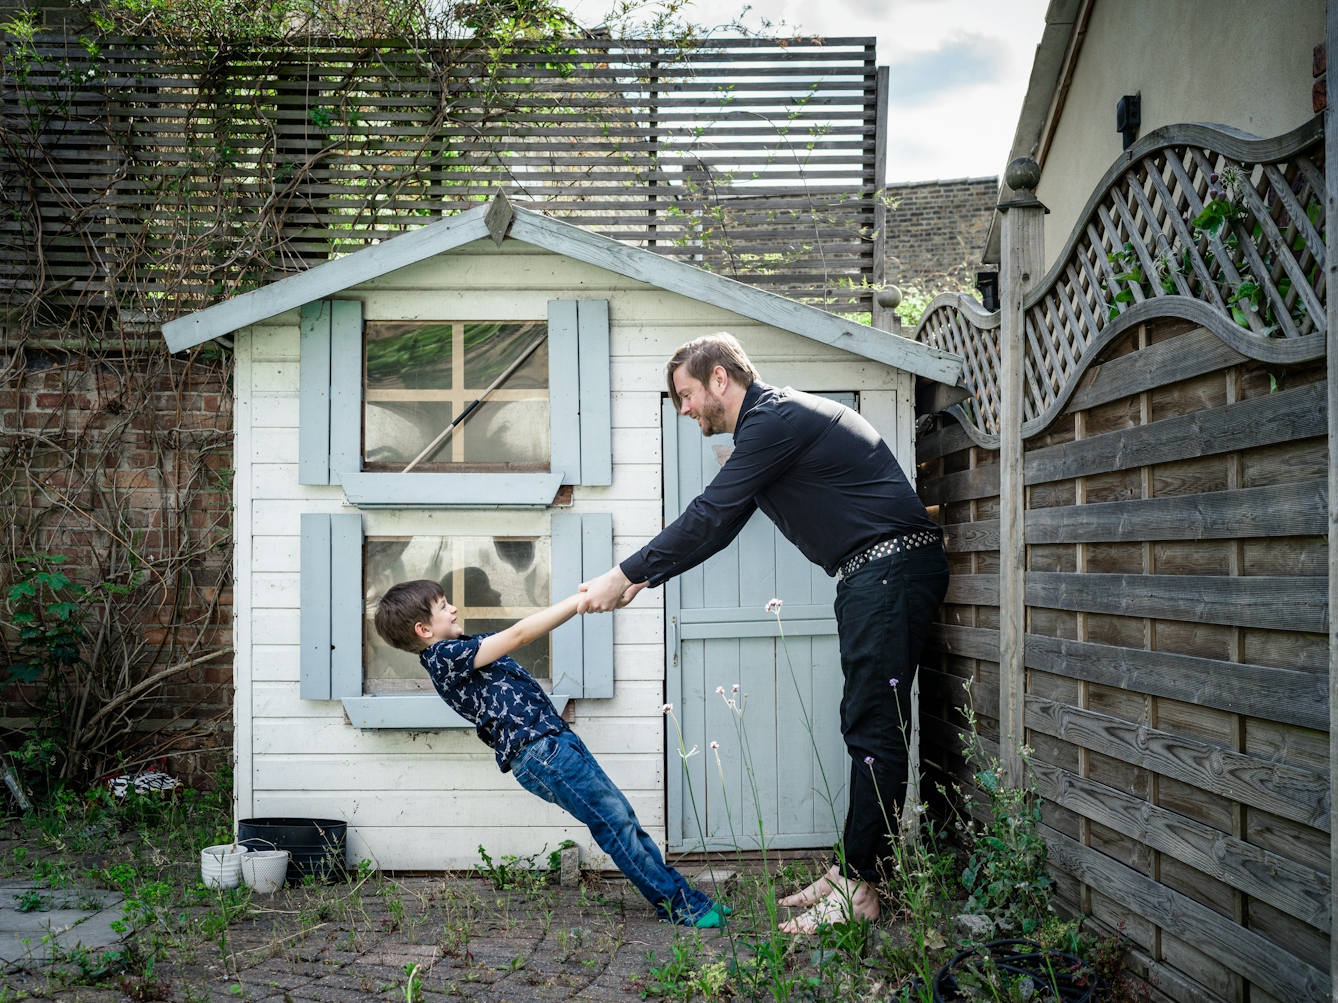 Photograph of a man and his young son in their back garden in front of a Wendy house. They are holding hands and the young son is leaning back at an extreme angle, held up only by his father.